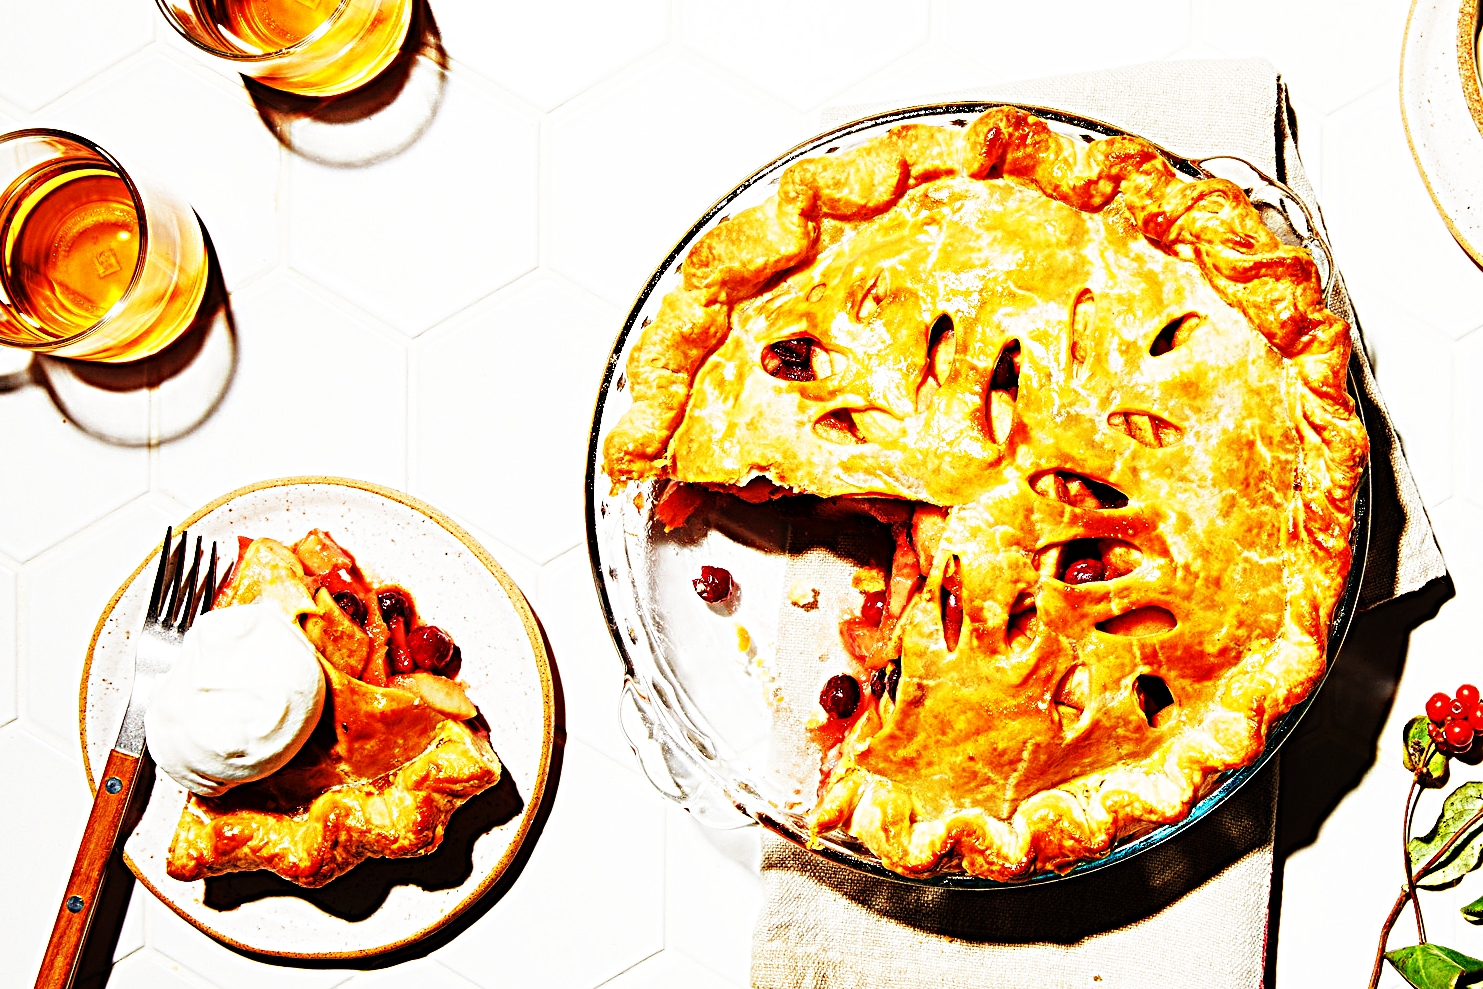 Stupid-Easy Recipe for Spiced Apple Cranberry Pie (#1 Top-Rated)